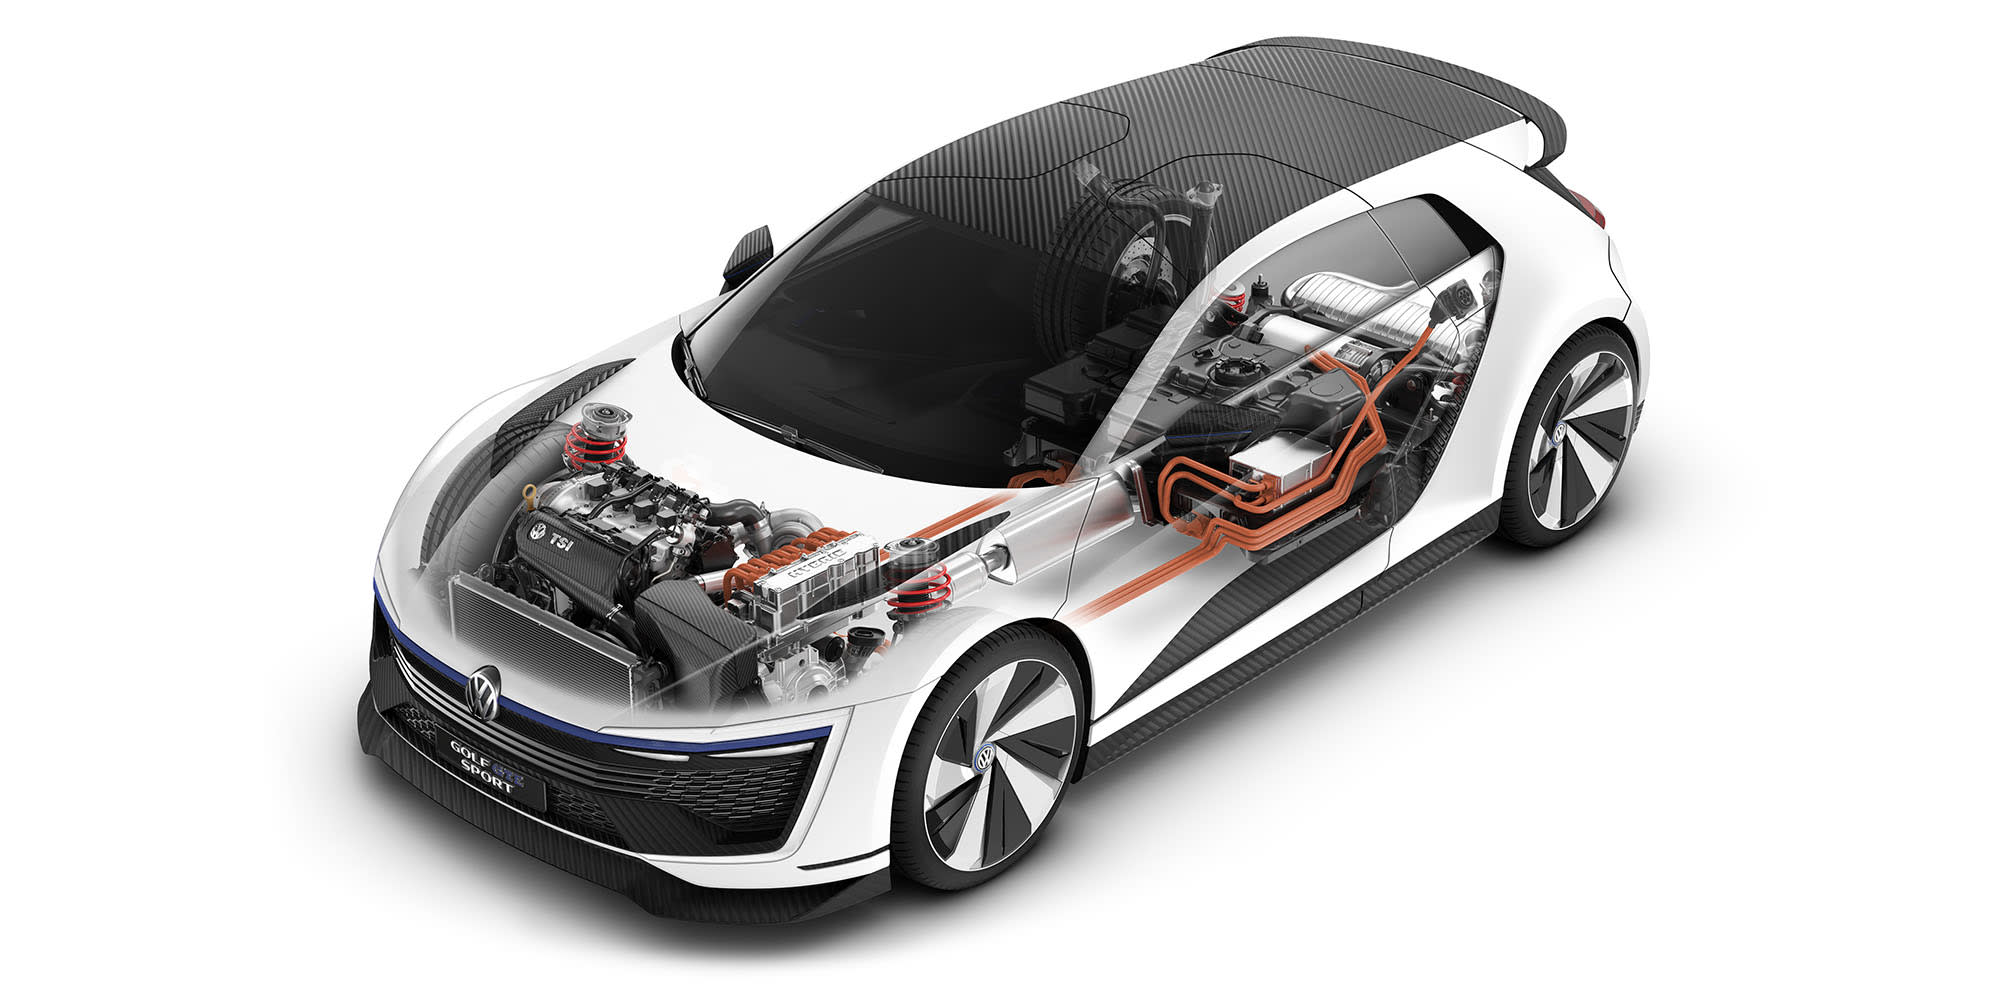 Volkswagen Group to replicate battery technologies across models and